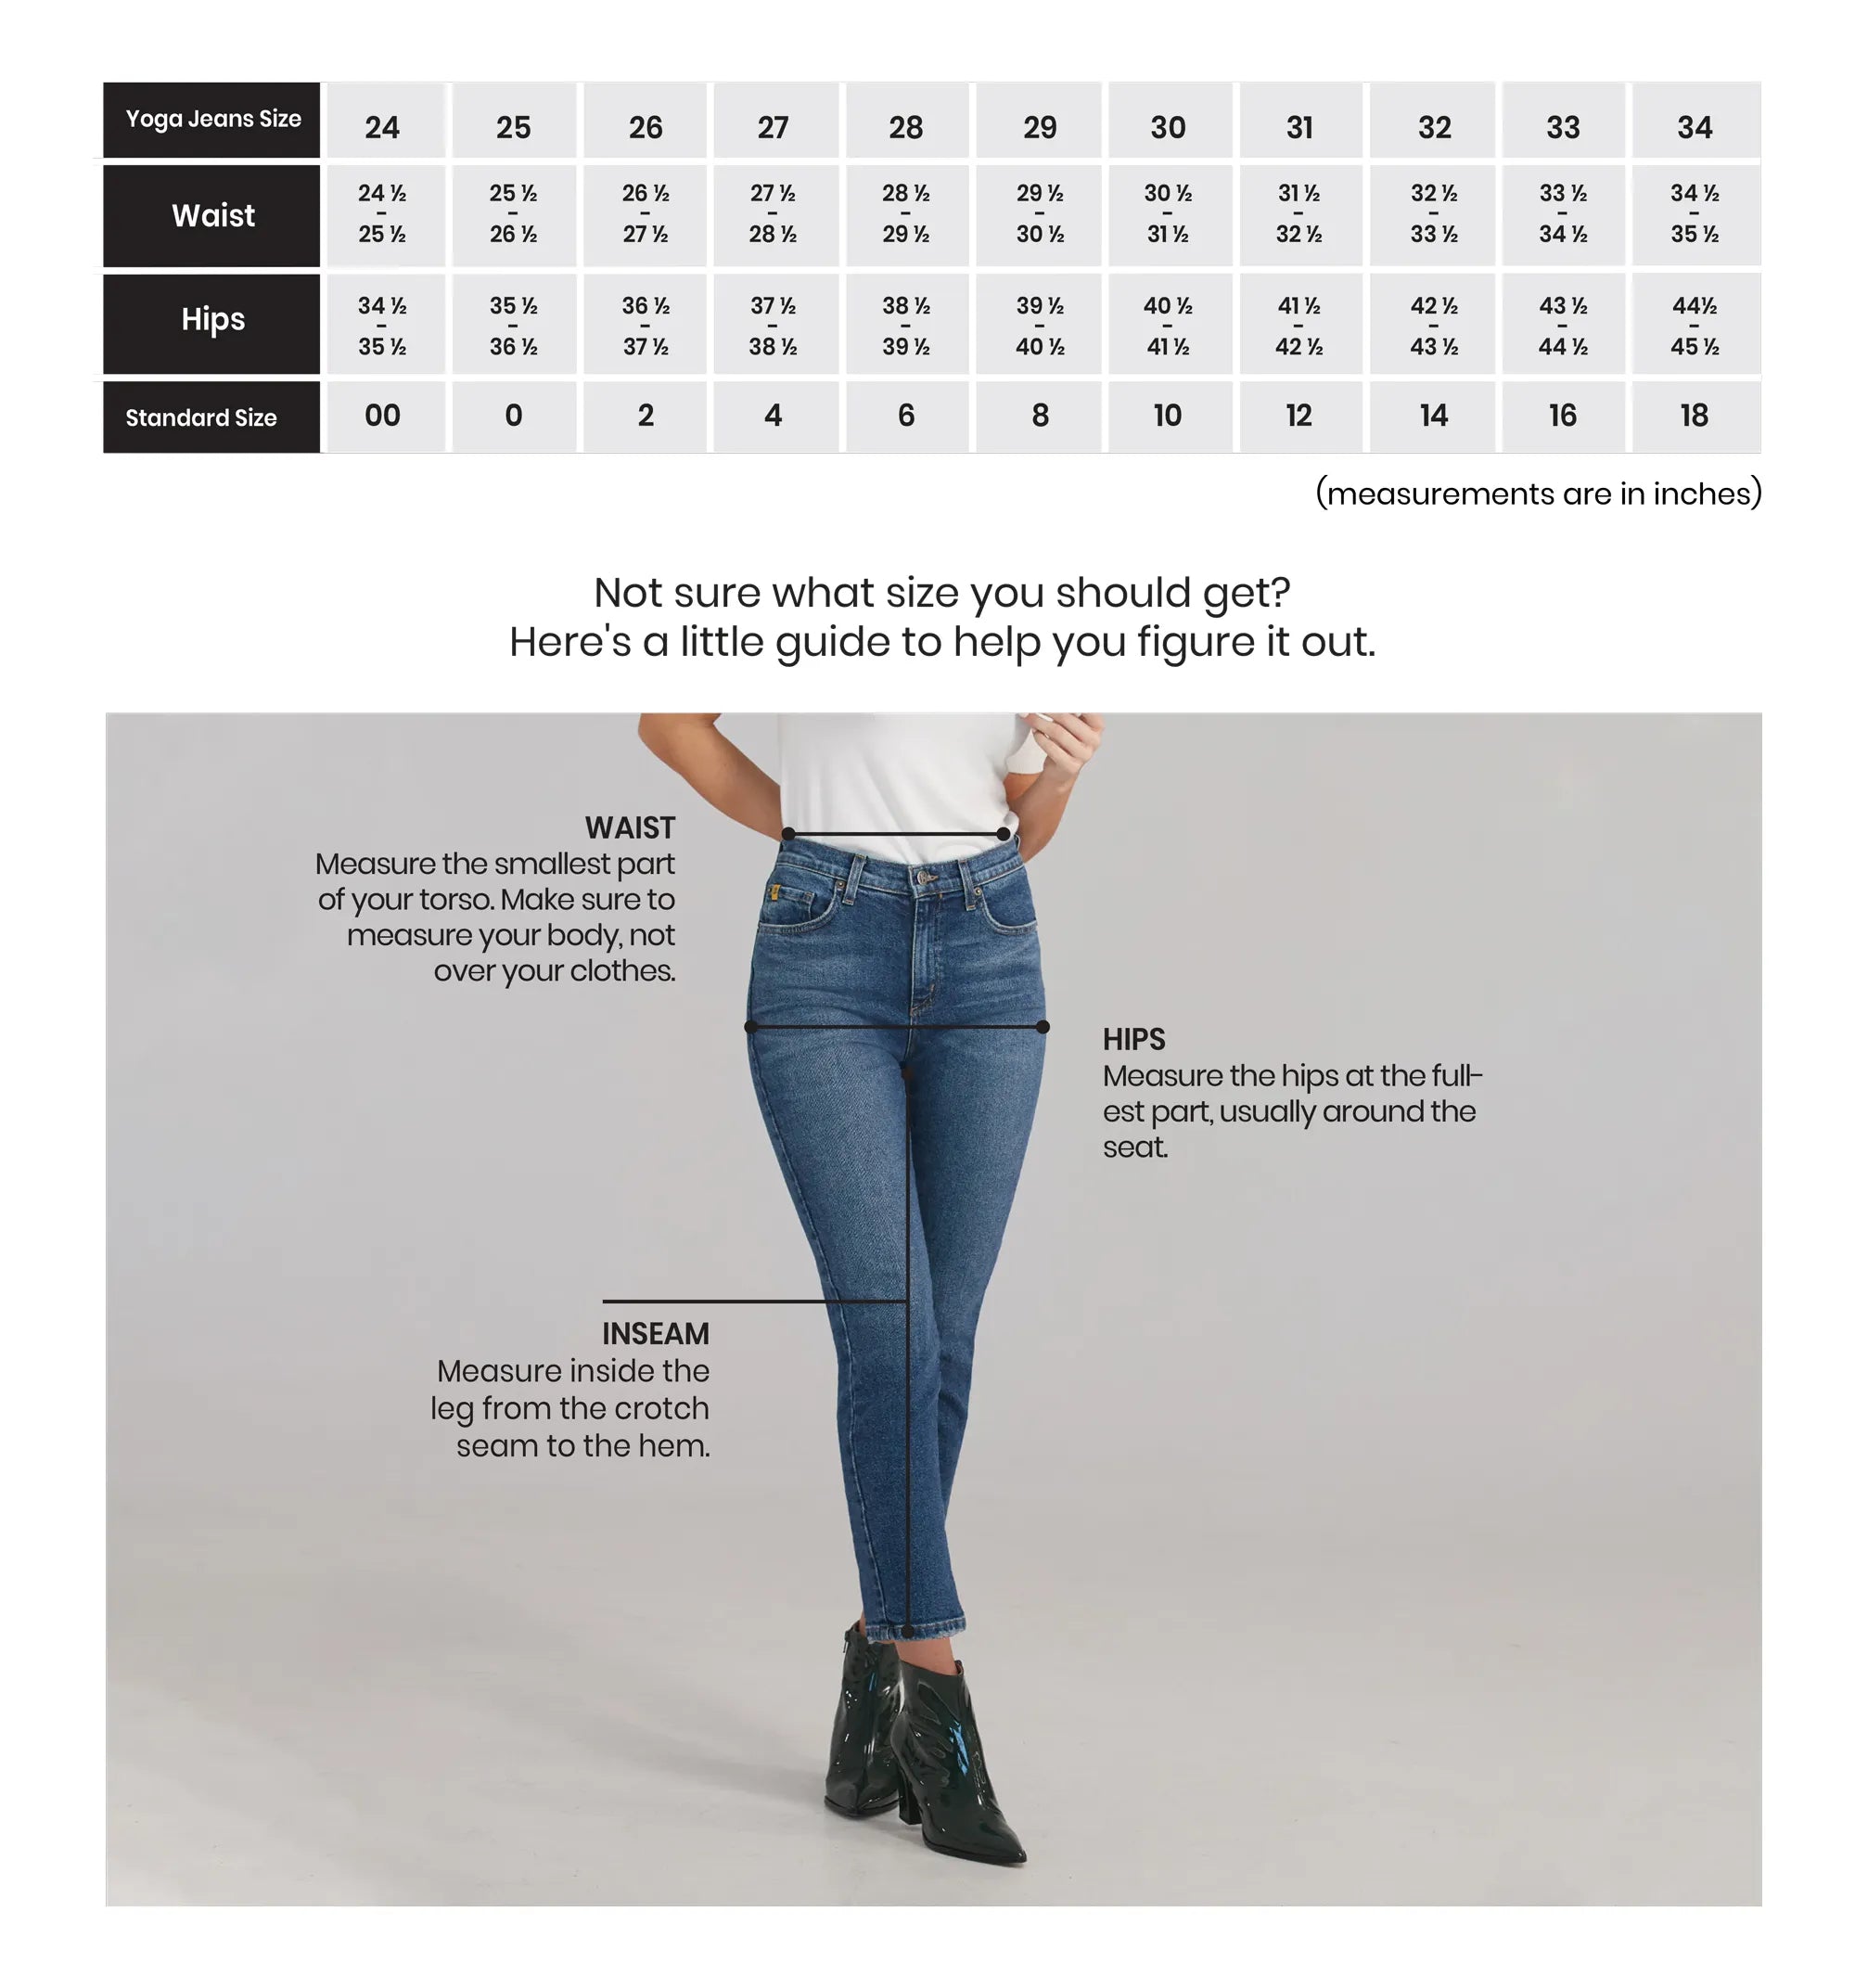 Yoga Jeans Size Guide